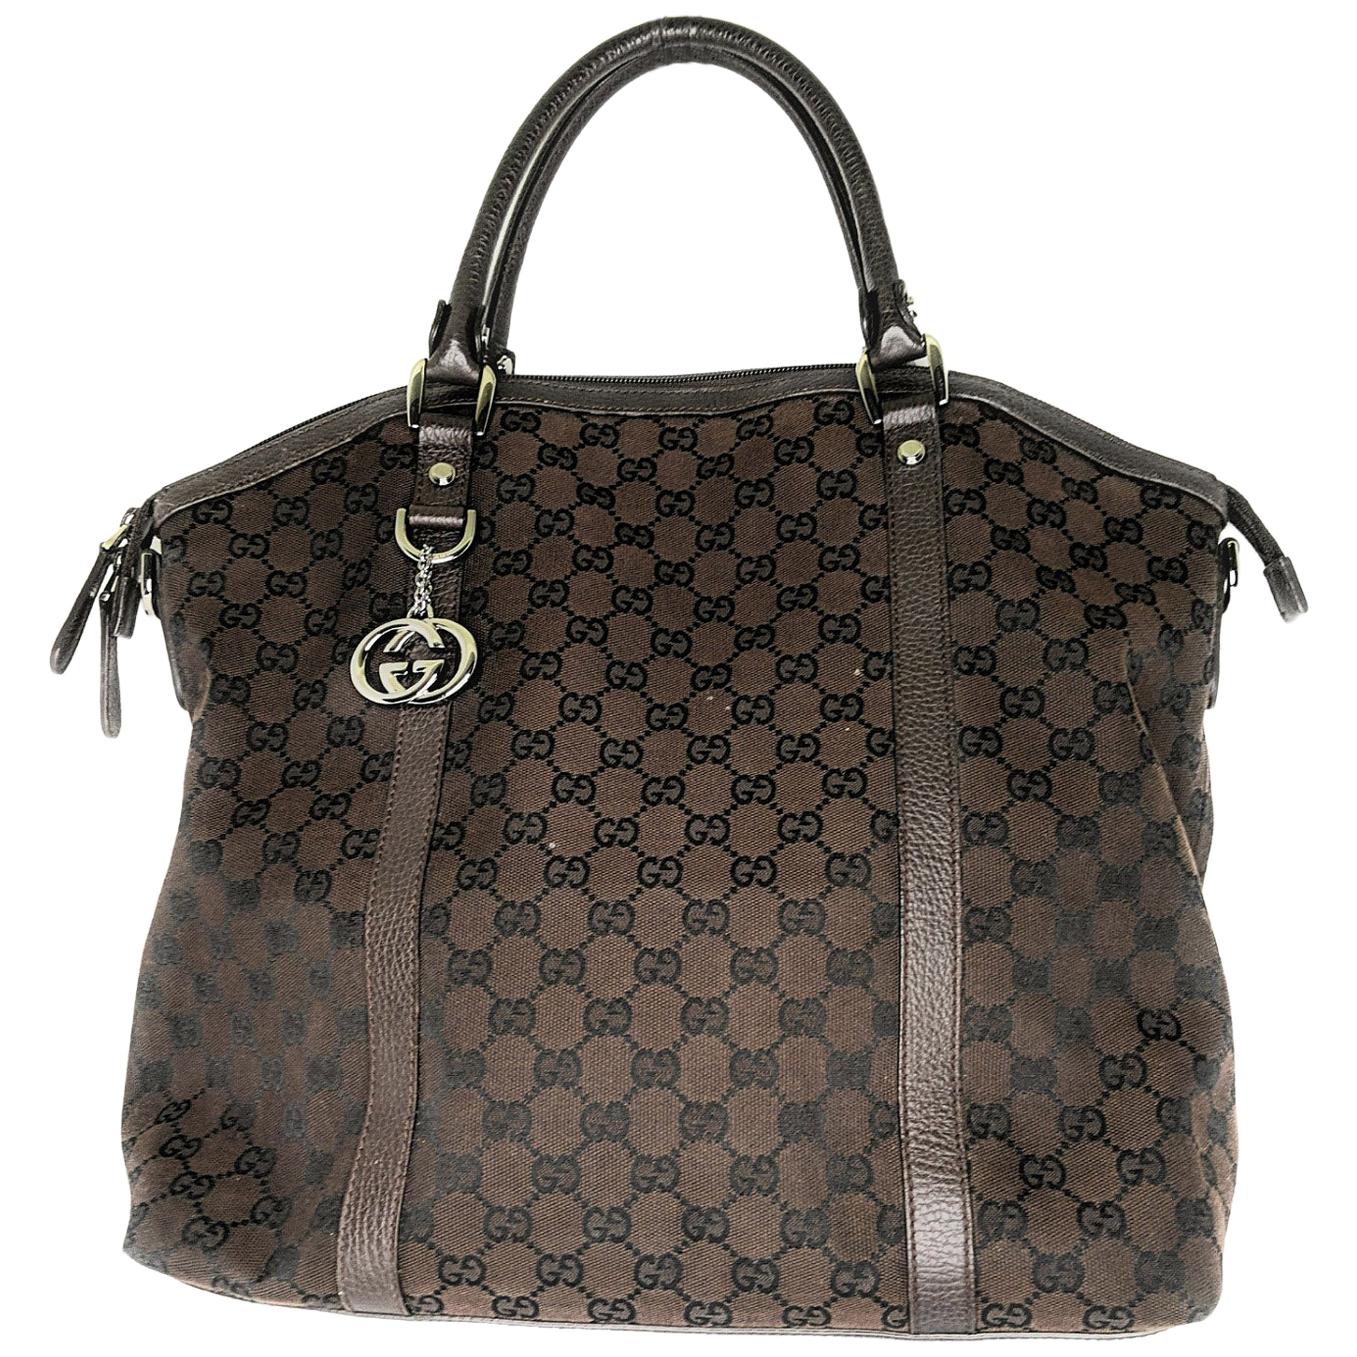 Gucci GG Charm Convertible Large Dome Satchel